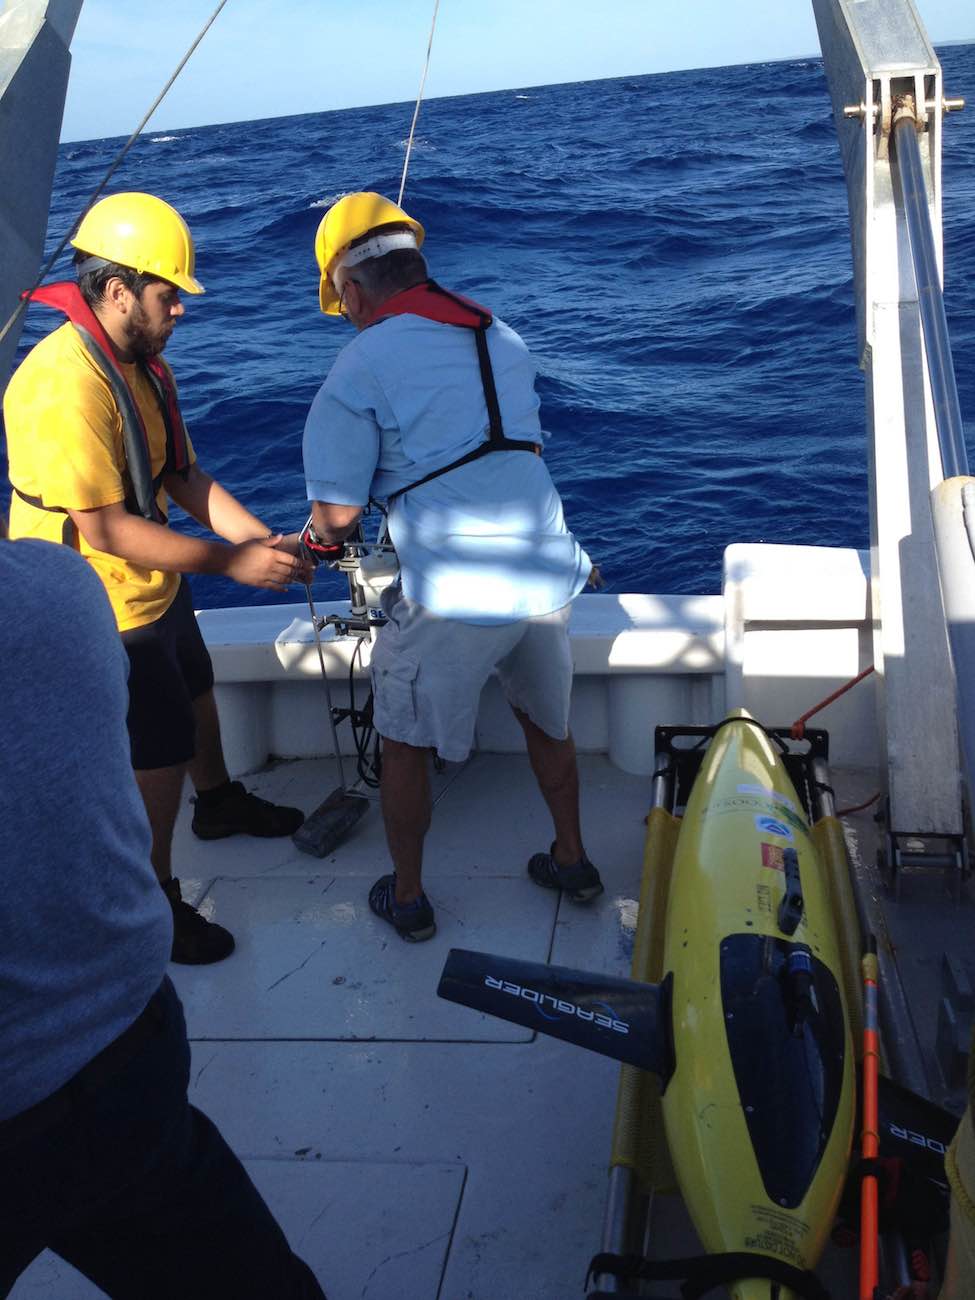 The glider is secured after being brought aboard the R/V La Sultana. Image credit: NOAA